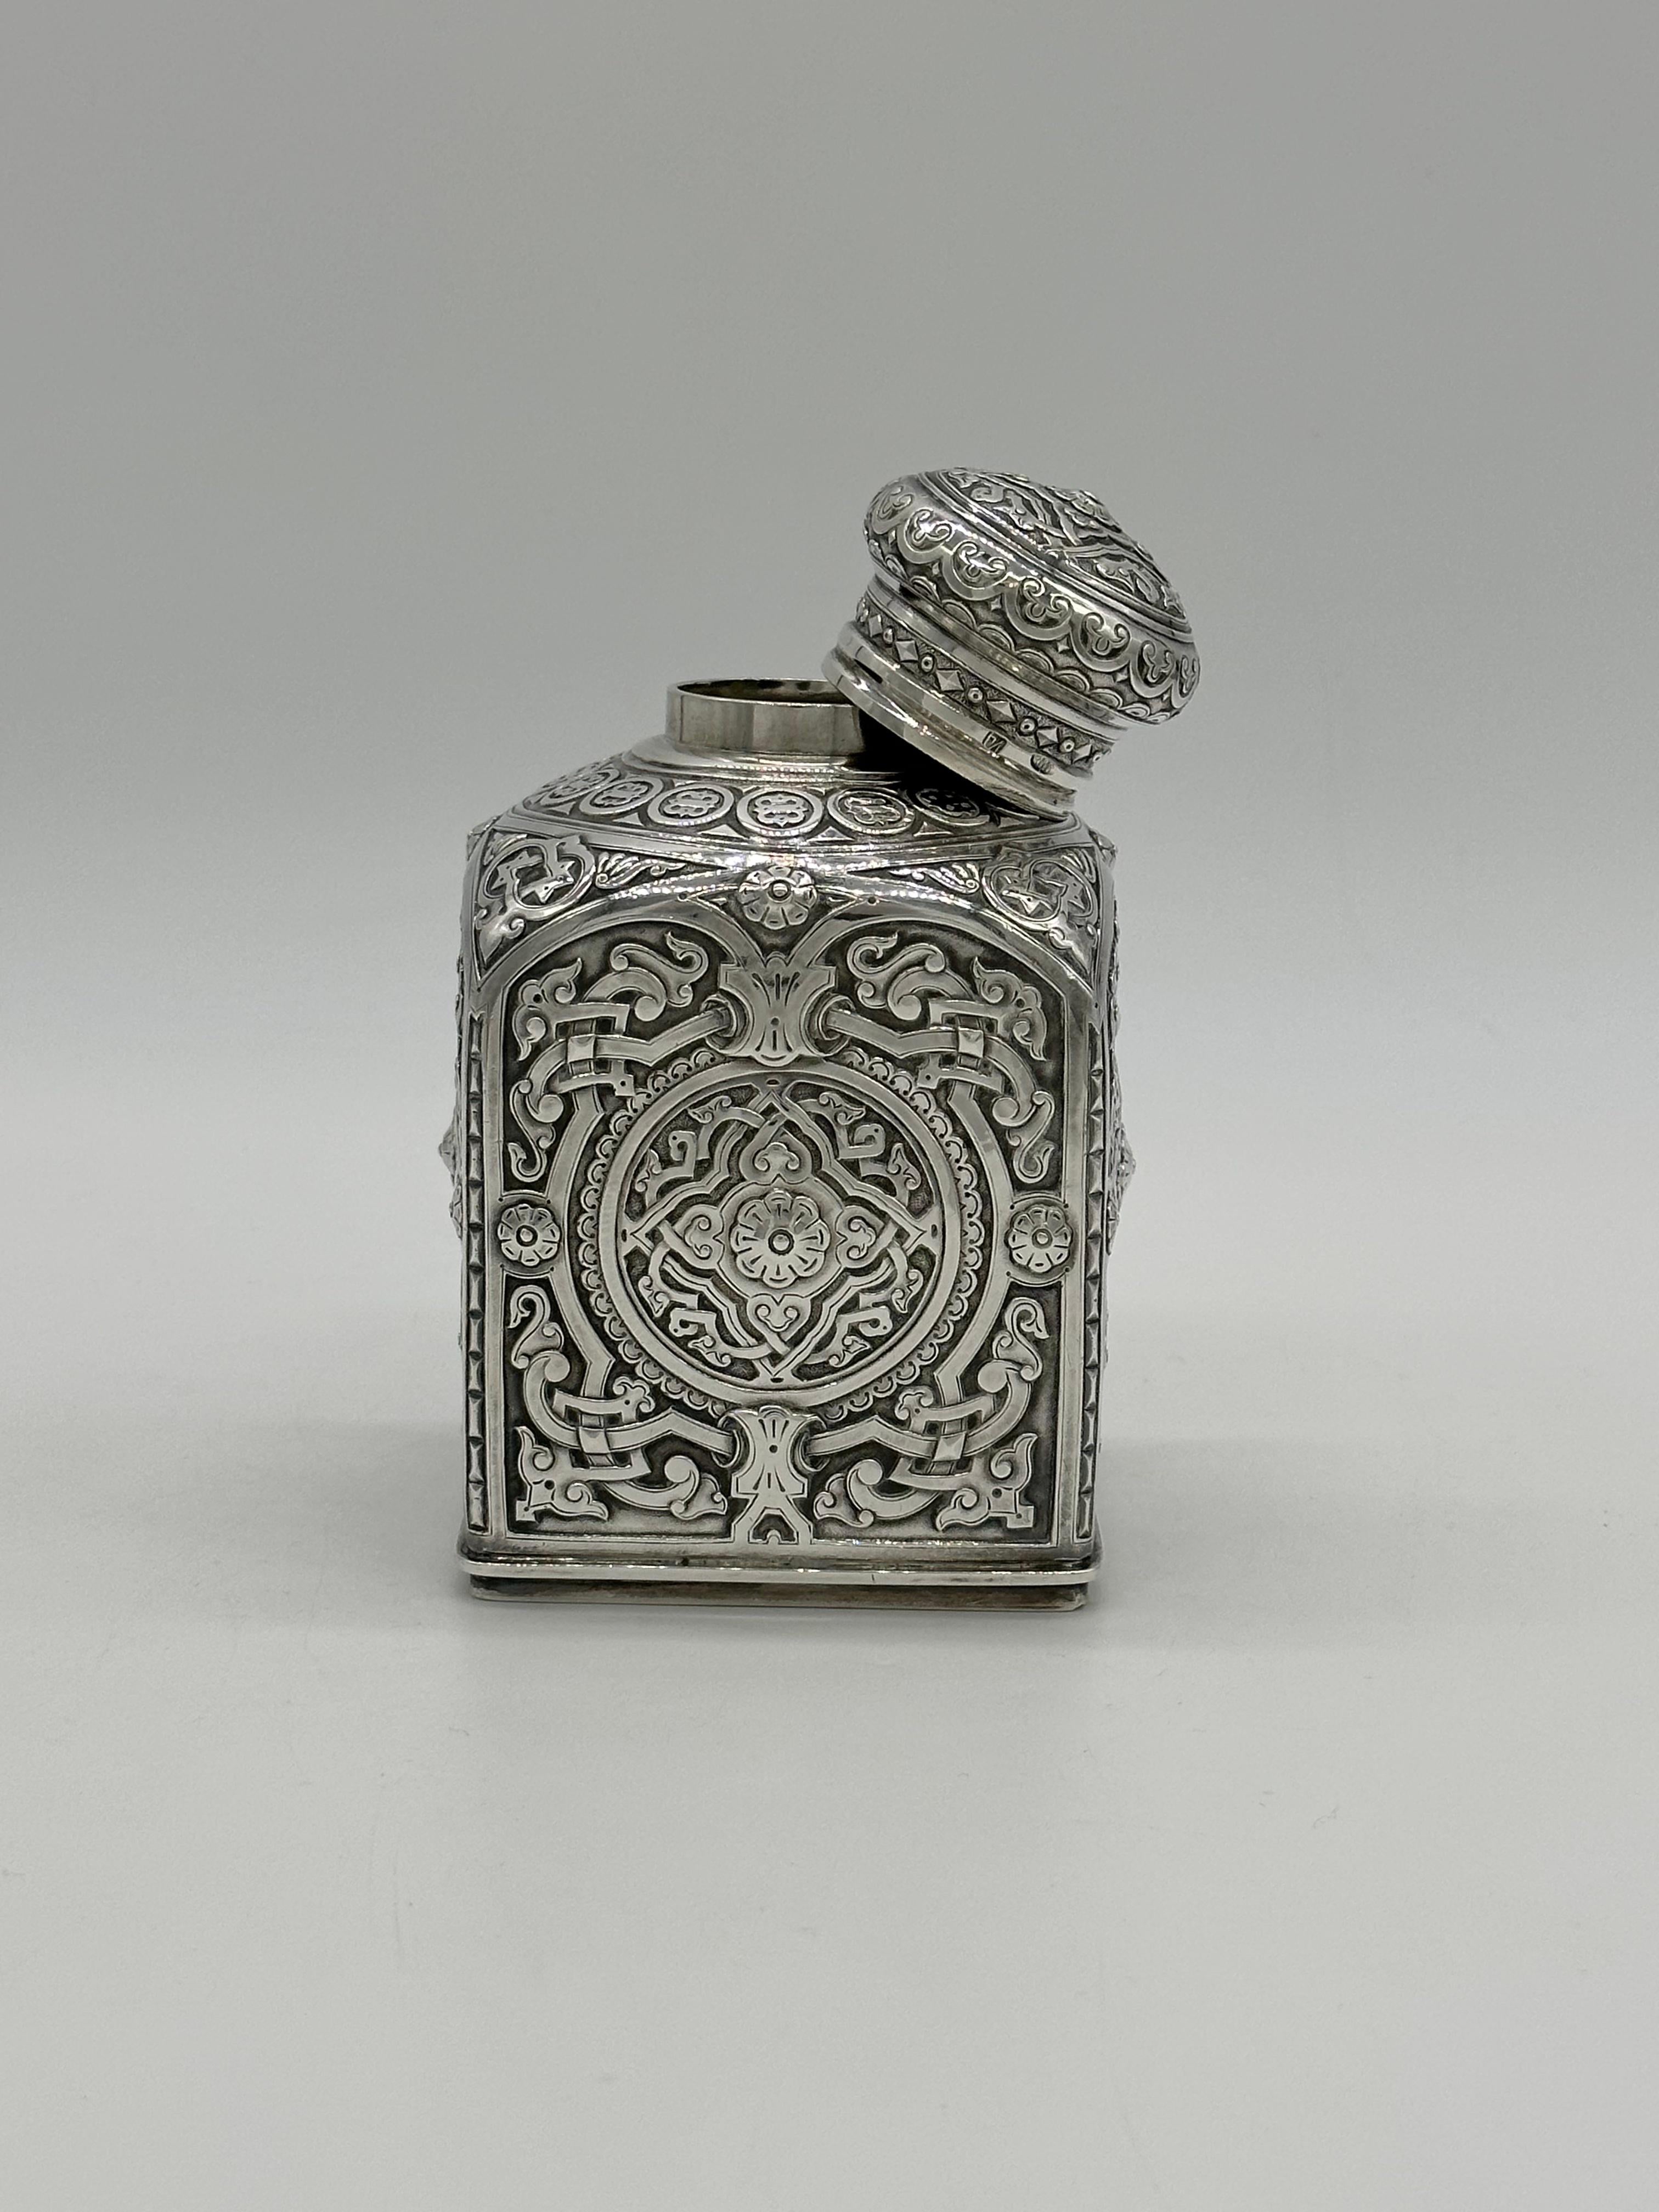 Amazing Antique Russian Imperial Silver Tea Caddy, Loskutov, Moscow 1889 1